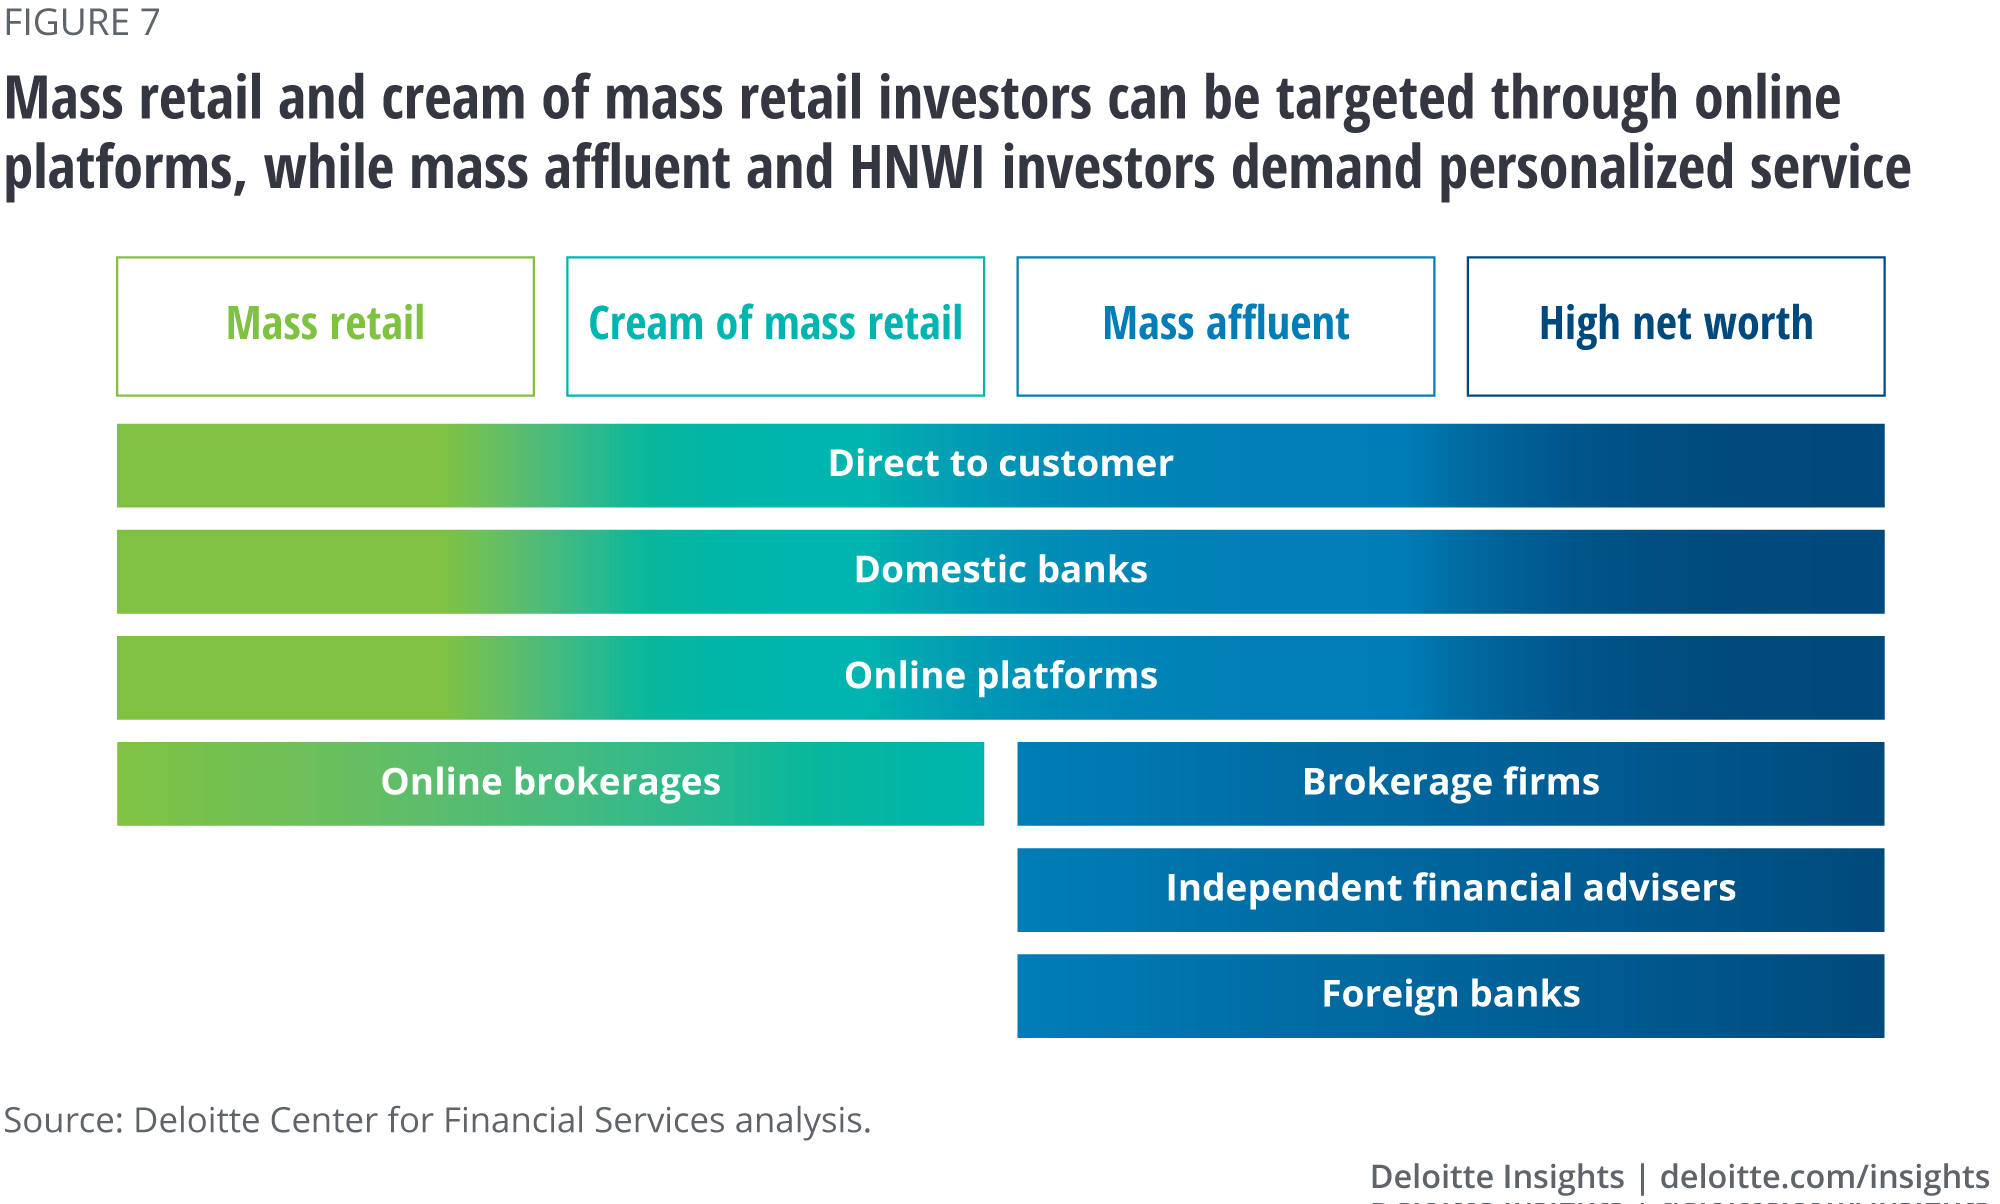 Mass retail and cream of mass retail investors can be targeted through online platforms, while mass affluent and HNWI investors demand personalized service